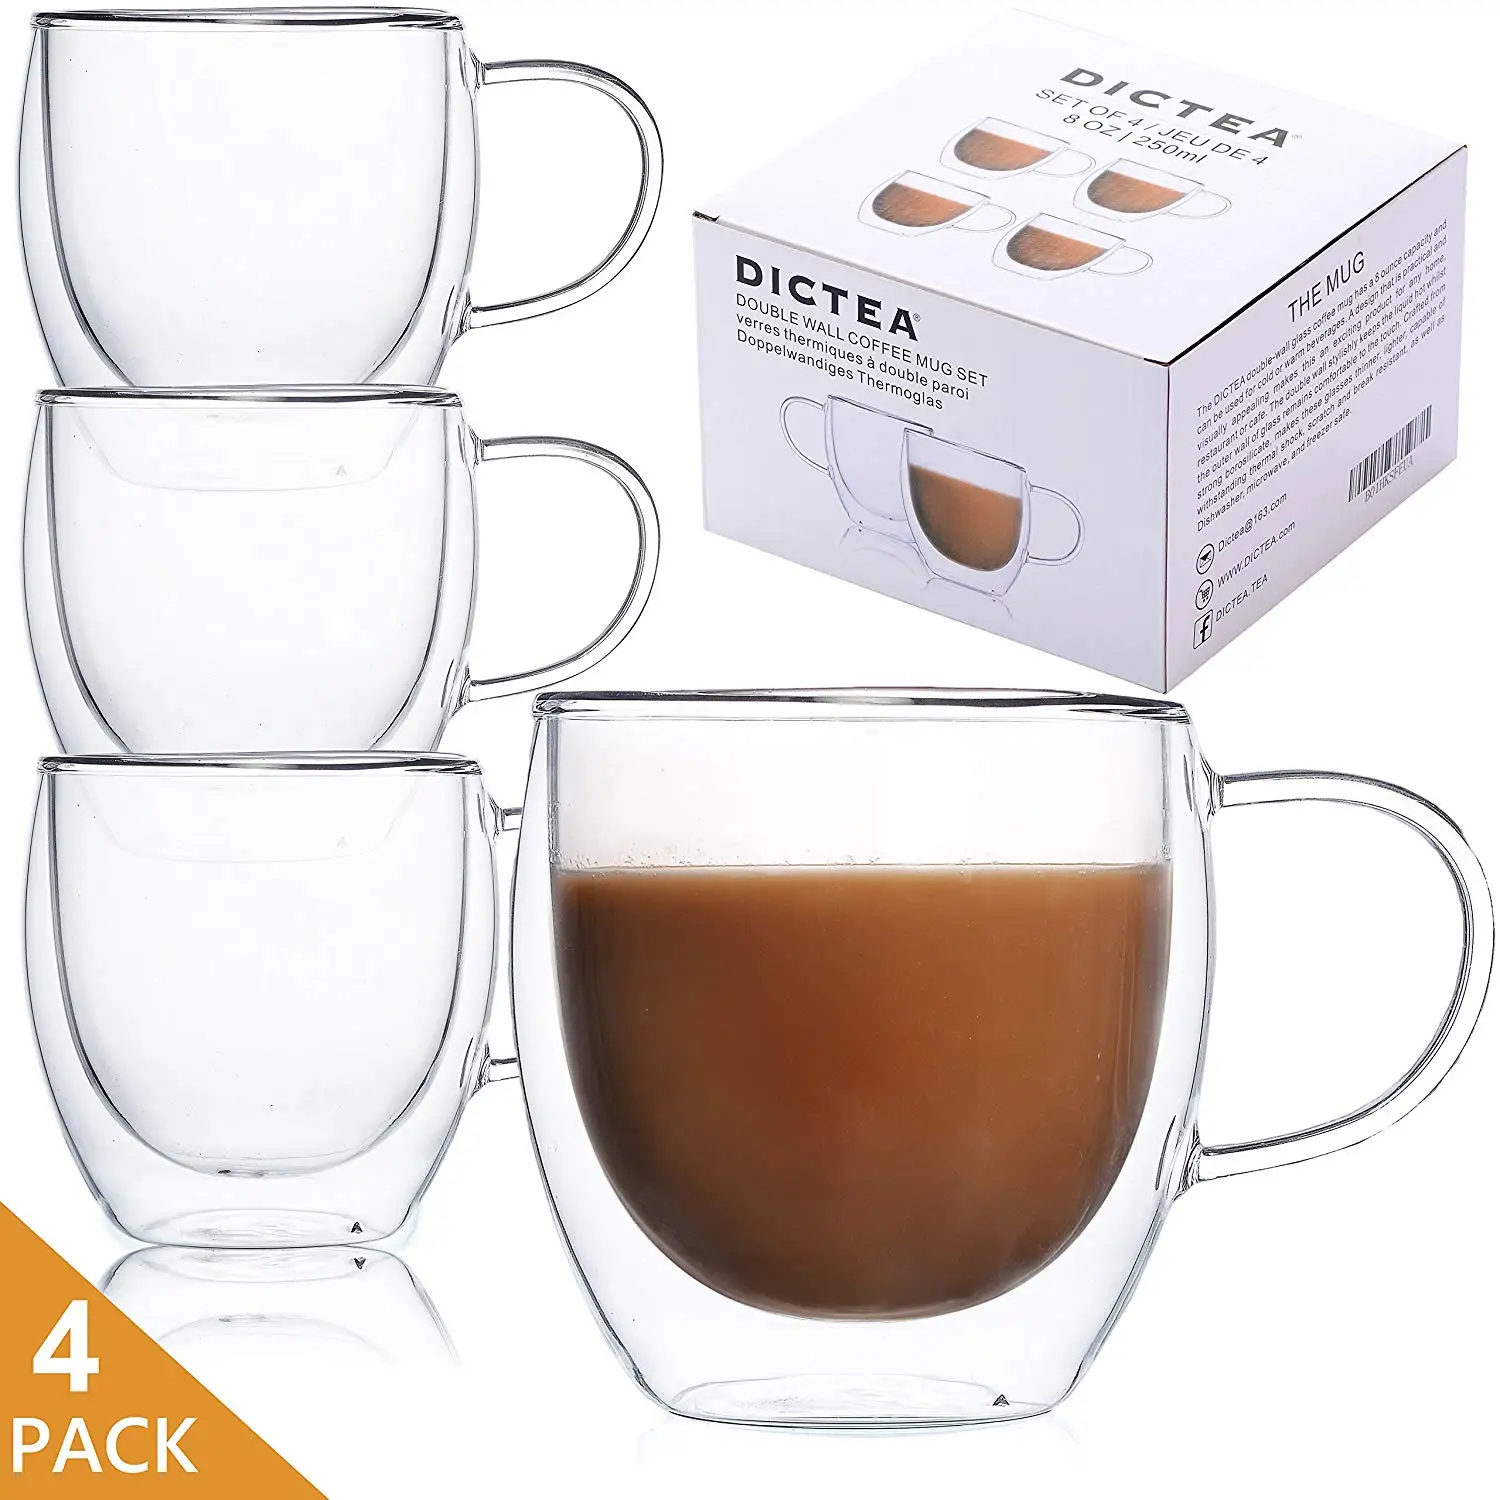 Cheap Insulated Drinking Mugs Find Insulated Drinking Mugs Deals On